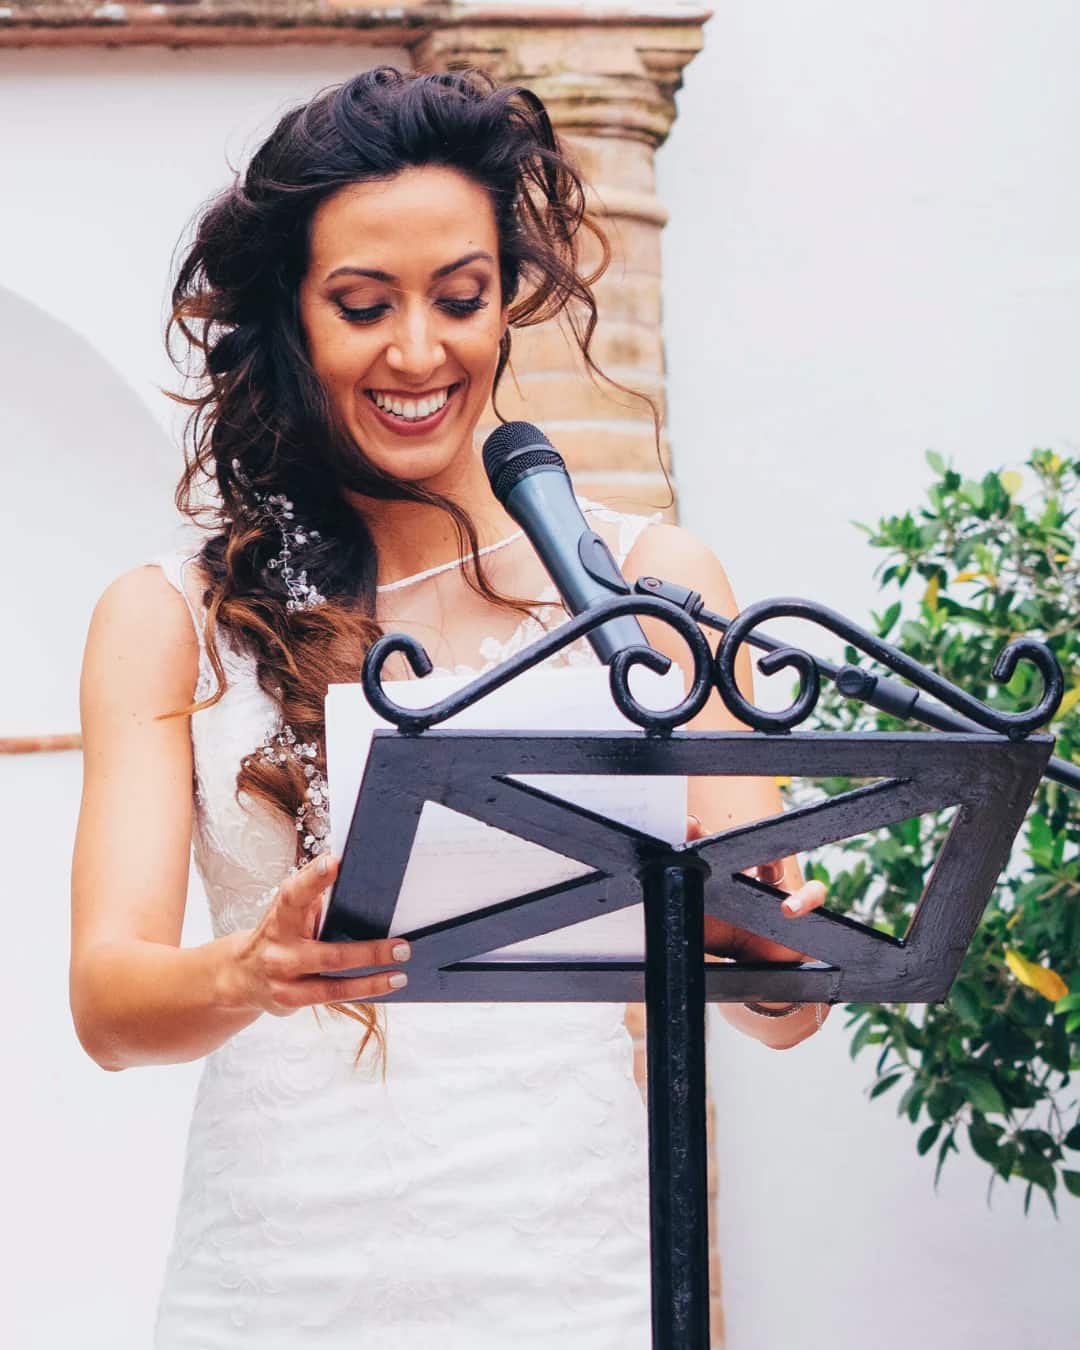 A young woman with long, dark hair, wearing an off white bridesmaid dress stands at a podium with notes in front of her. She is smiling and speaking into a microphone giving a maid of honor wedding speech. 